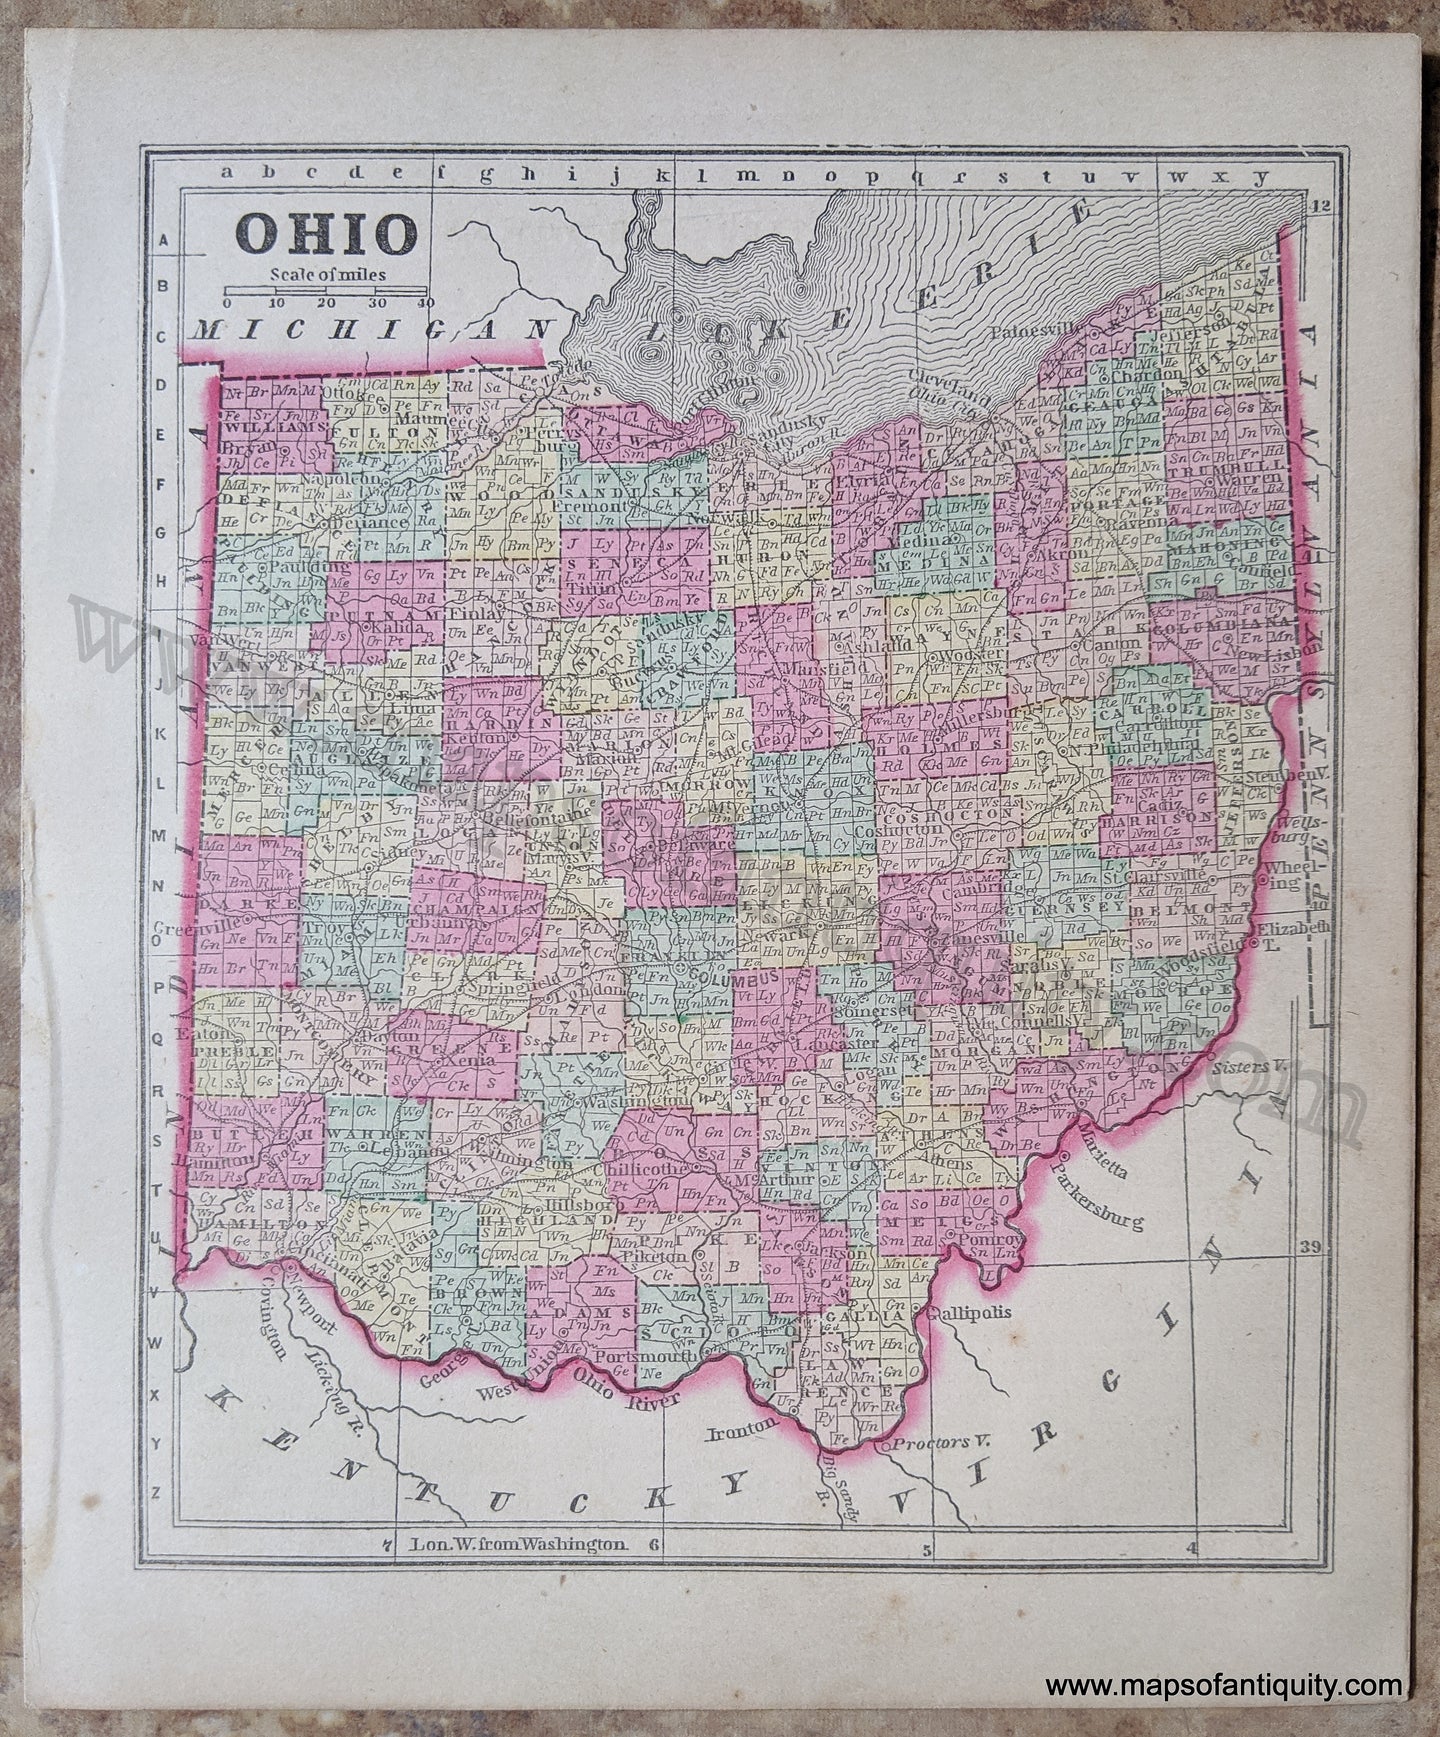 Antique-Uncolored-Map-Ohio-United-States-Midwest-1857-Morse-and-Gaston-Maps-Of-Antiquity-1800s-19th-century